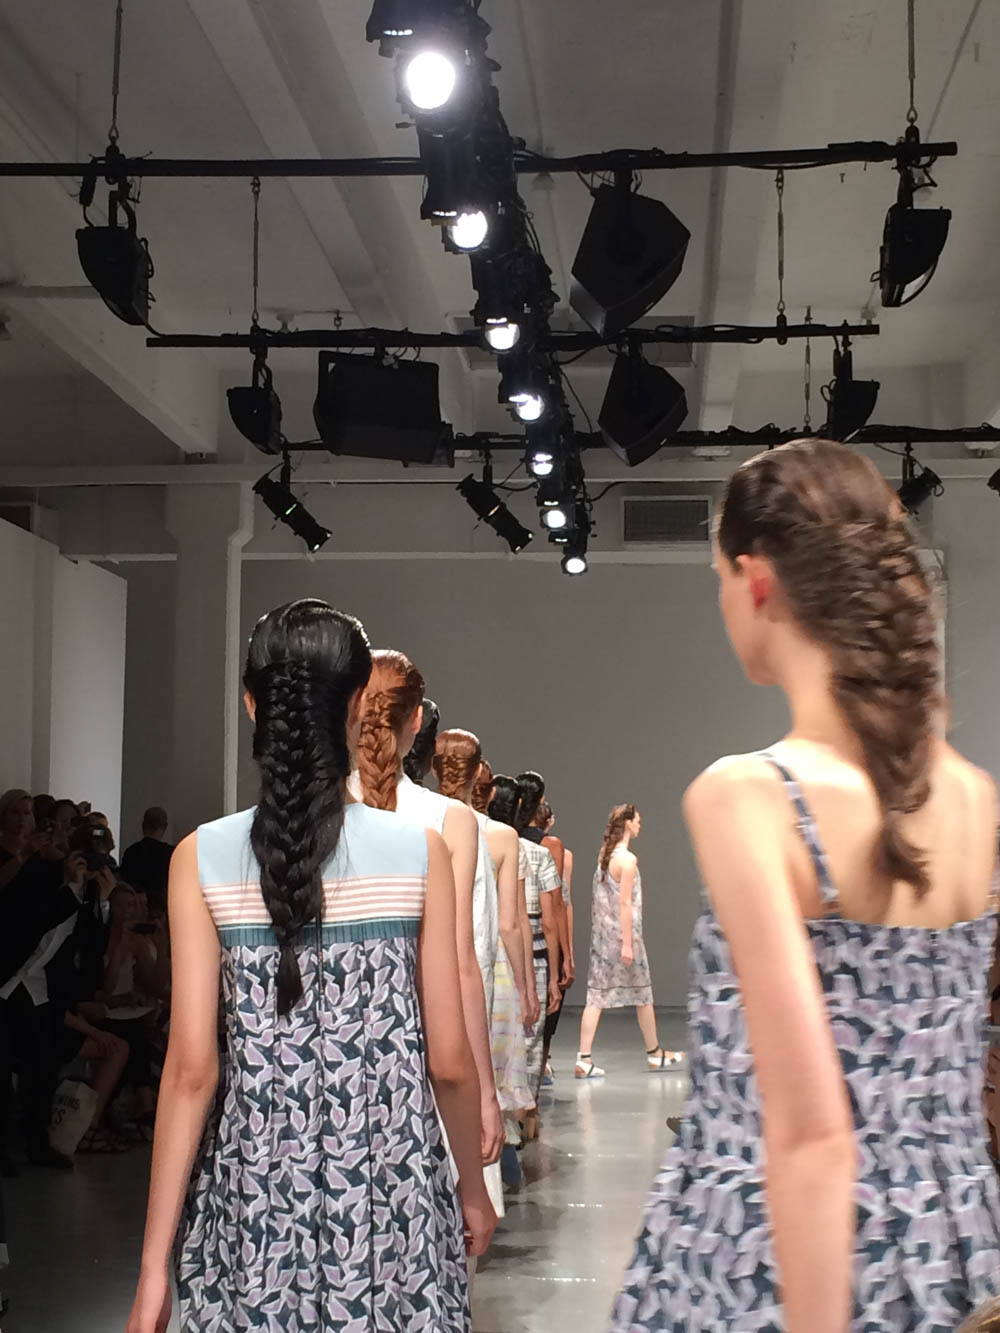 Gorgeous fishtail braids at the Suno show. I need to learn how to do this asap!